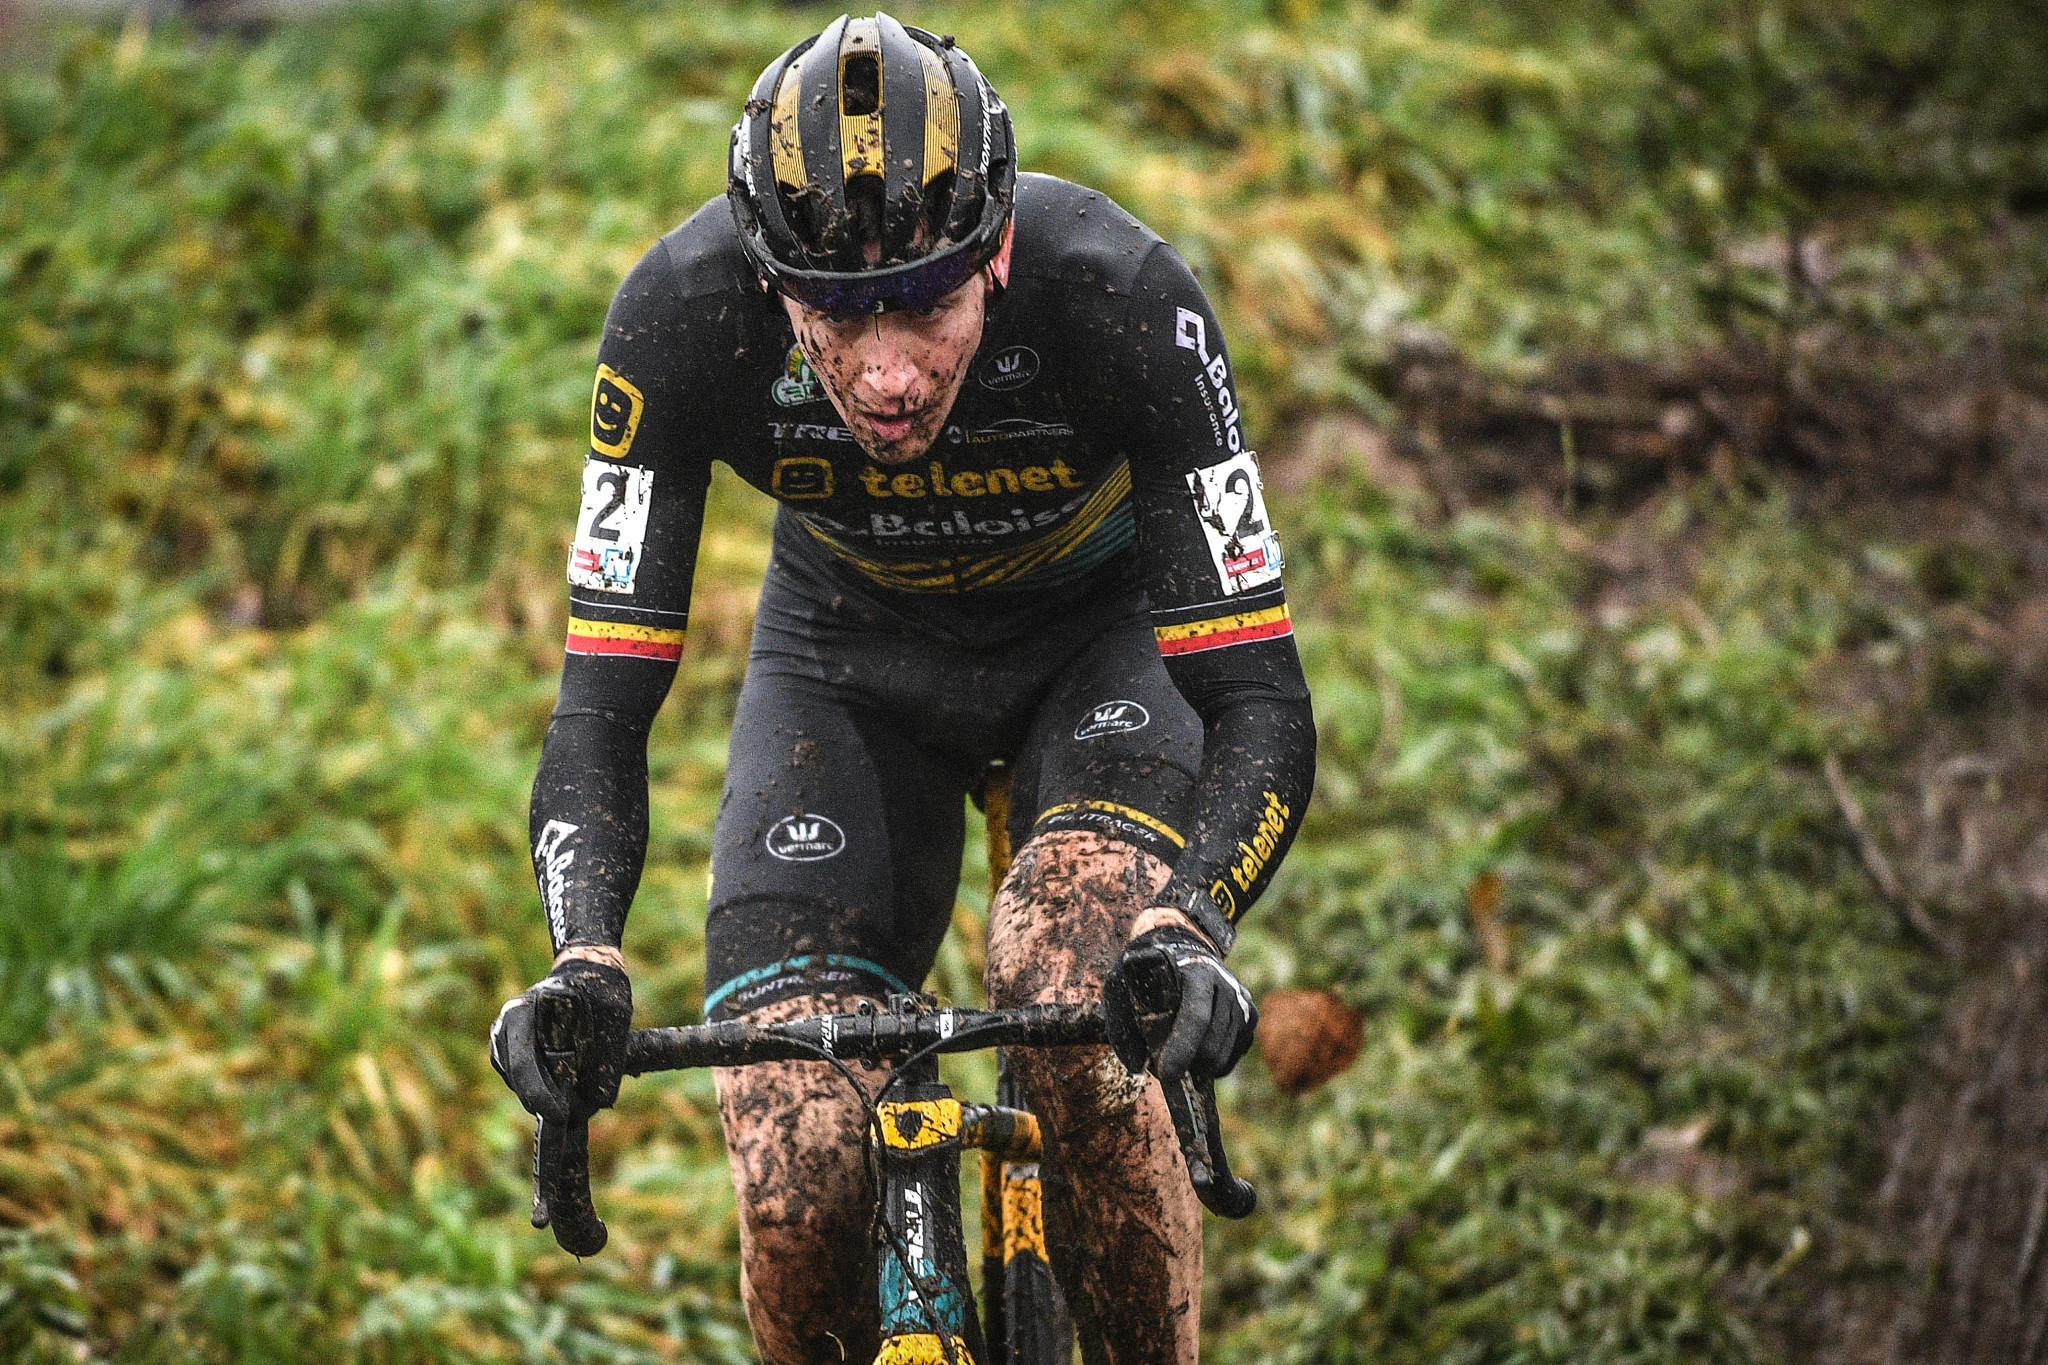 Nommay Pays de Montbeliard hosting penultimate event of UCI Cyclo-cross World Cup season